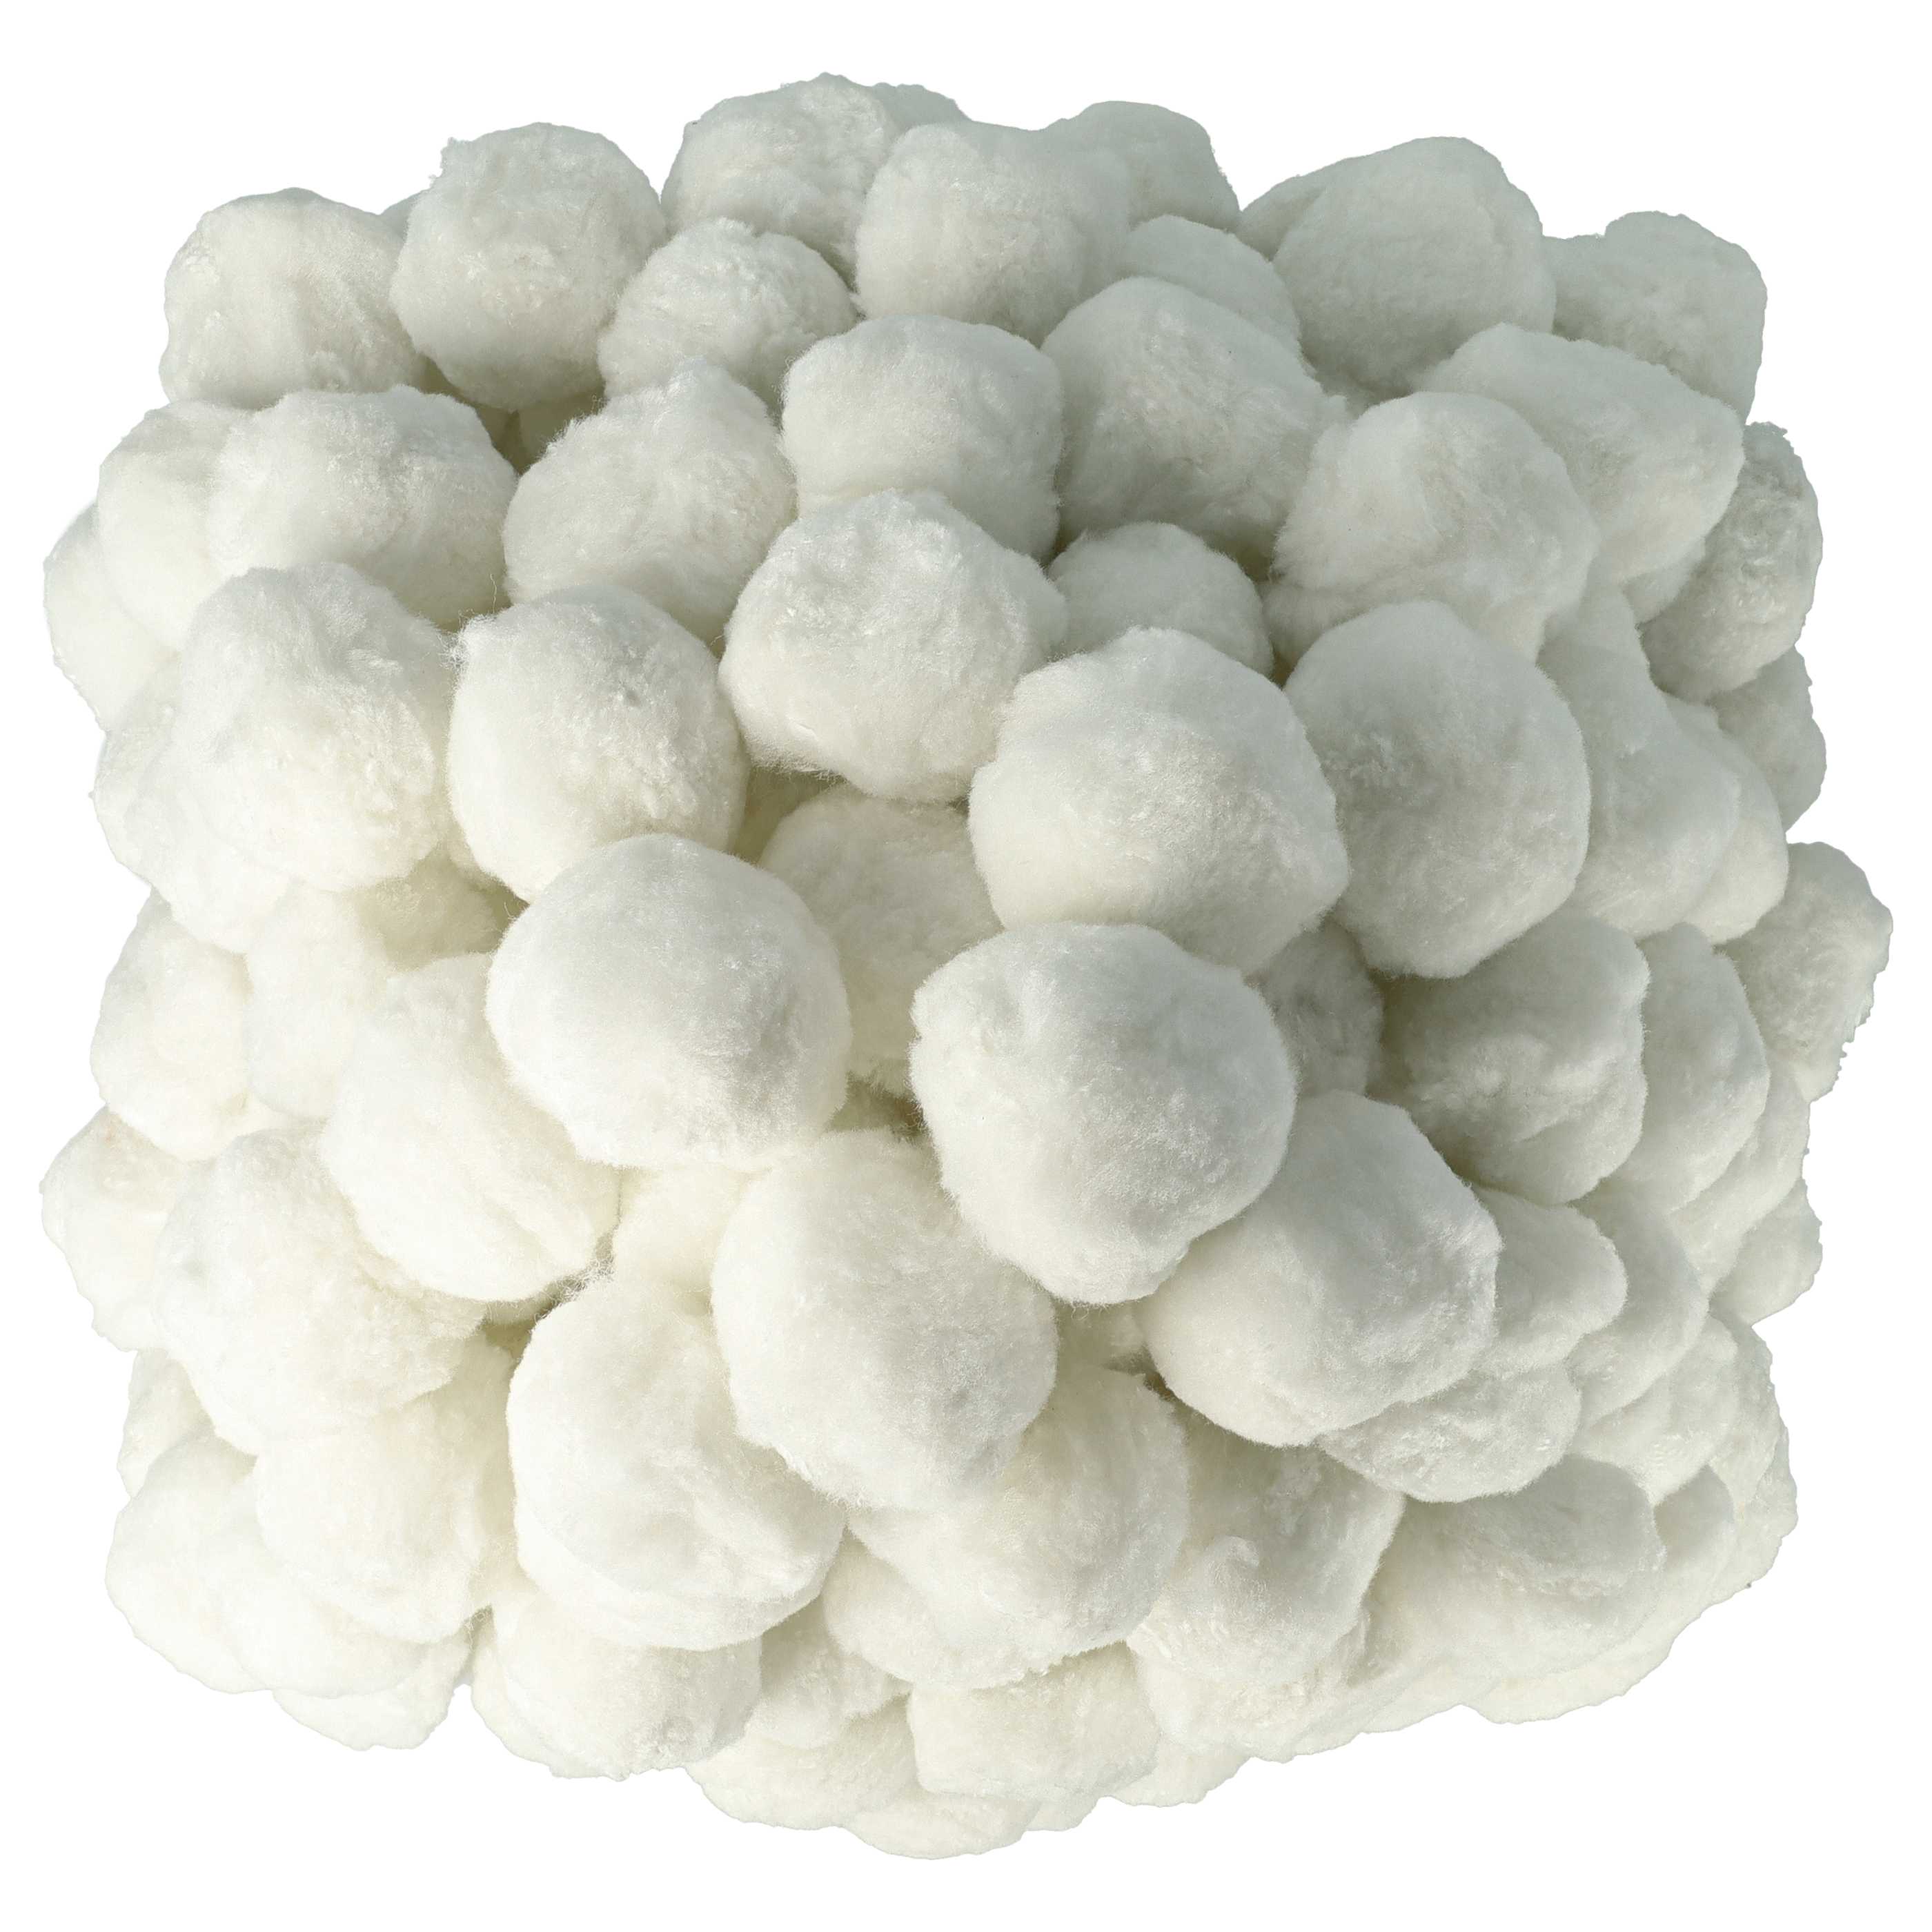 1000 g Filter Balls, Packaged replaces Bestway 58475 for Intex Pool Filtration System etc. - 50 mm